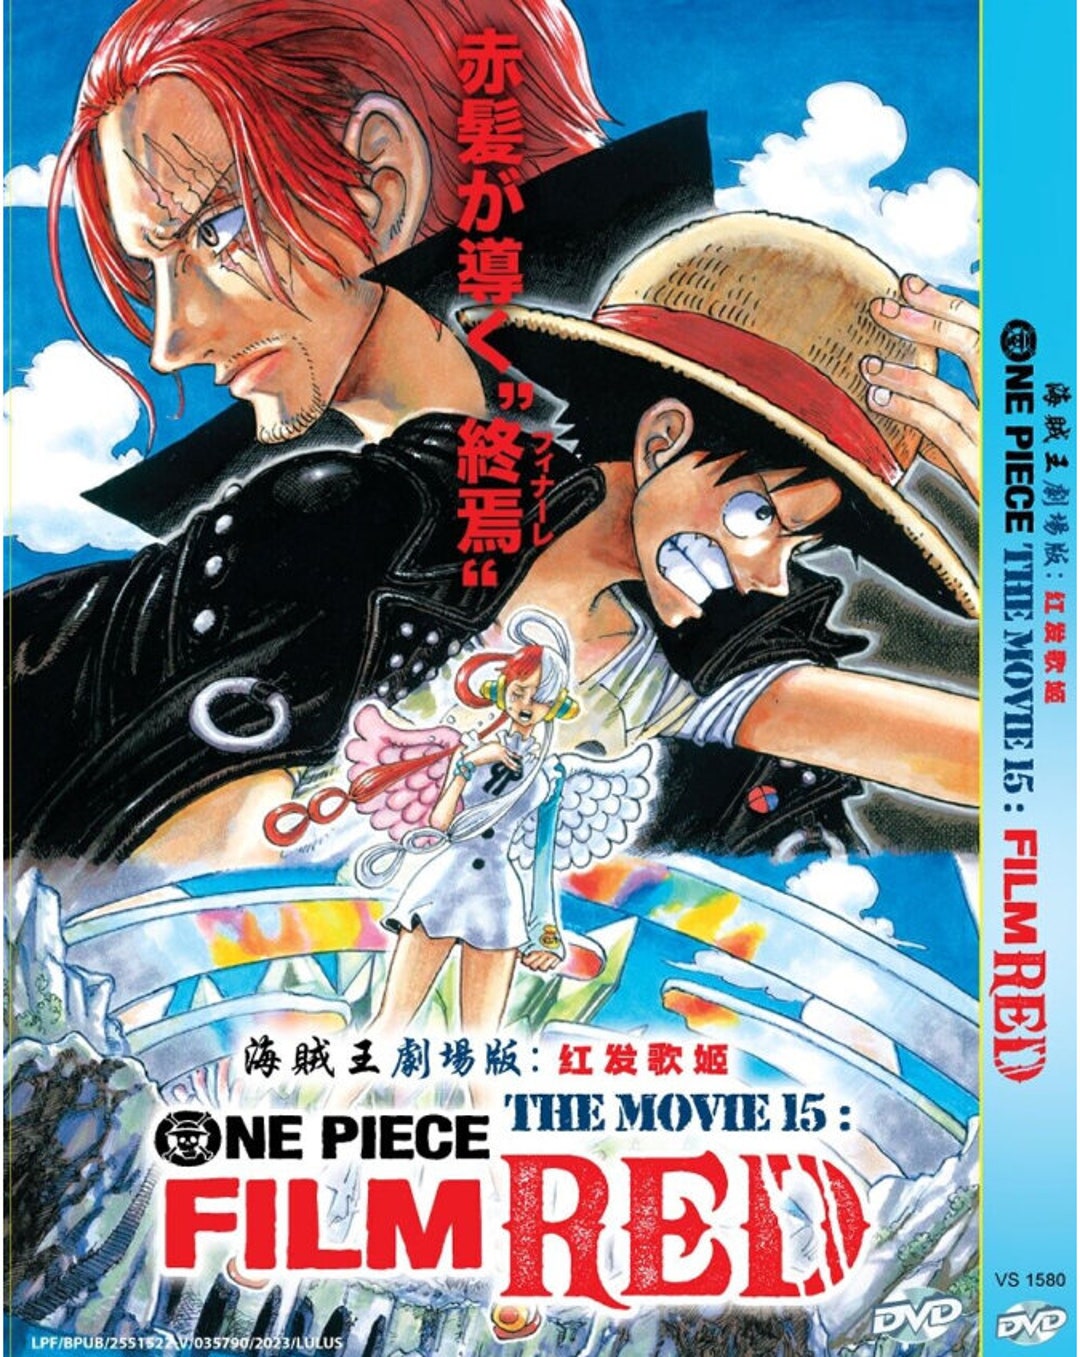 ONE PIECE (1-720) - ANIME TV SERIES DVD (1-720 EPS)(ENGLISH DUBBED) SHIP  FROM US